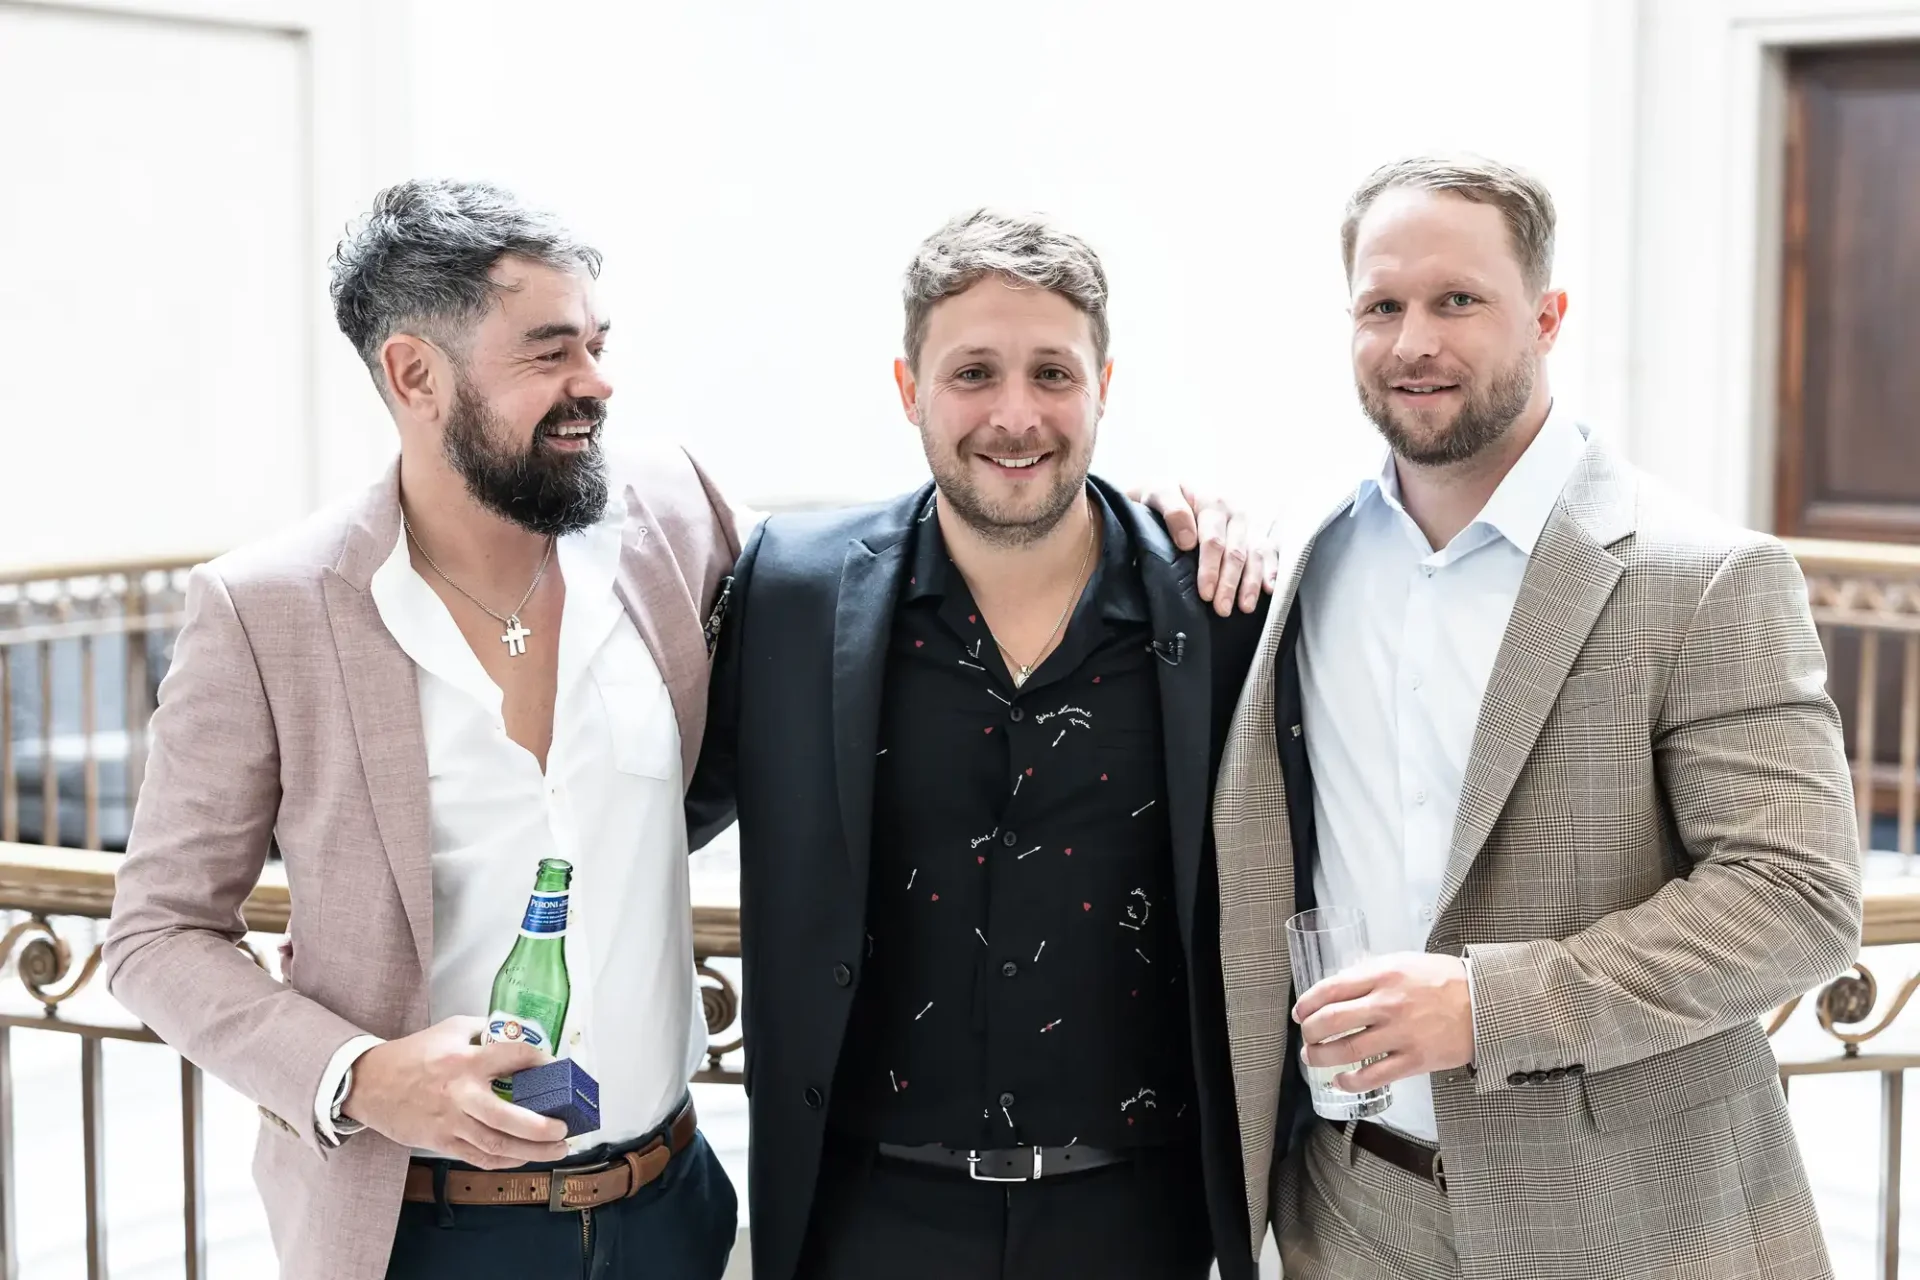 Three men in semi-formal attire smiling and posing together at an event, two holding drinks.